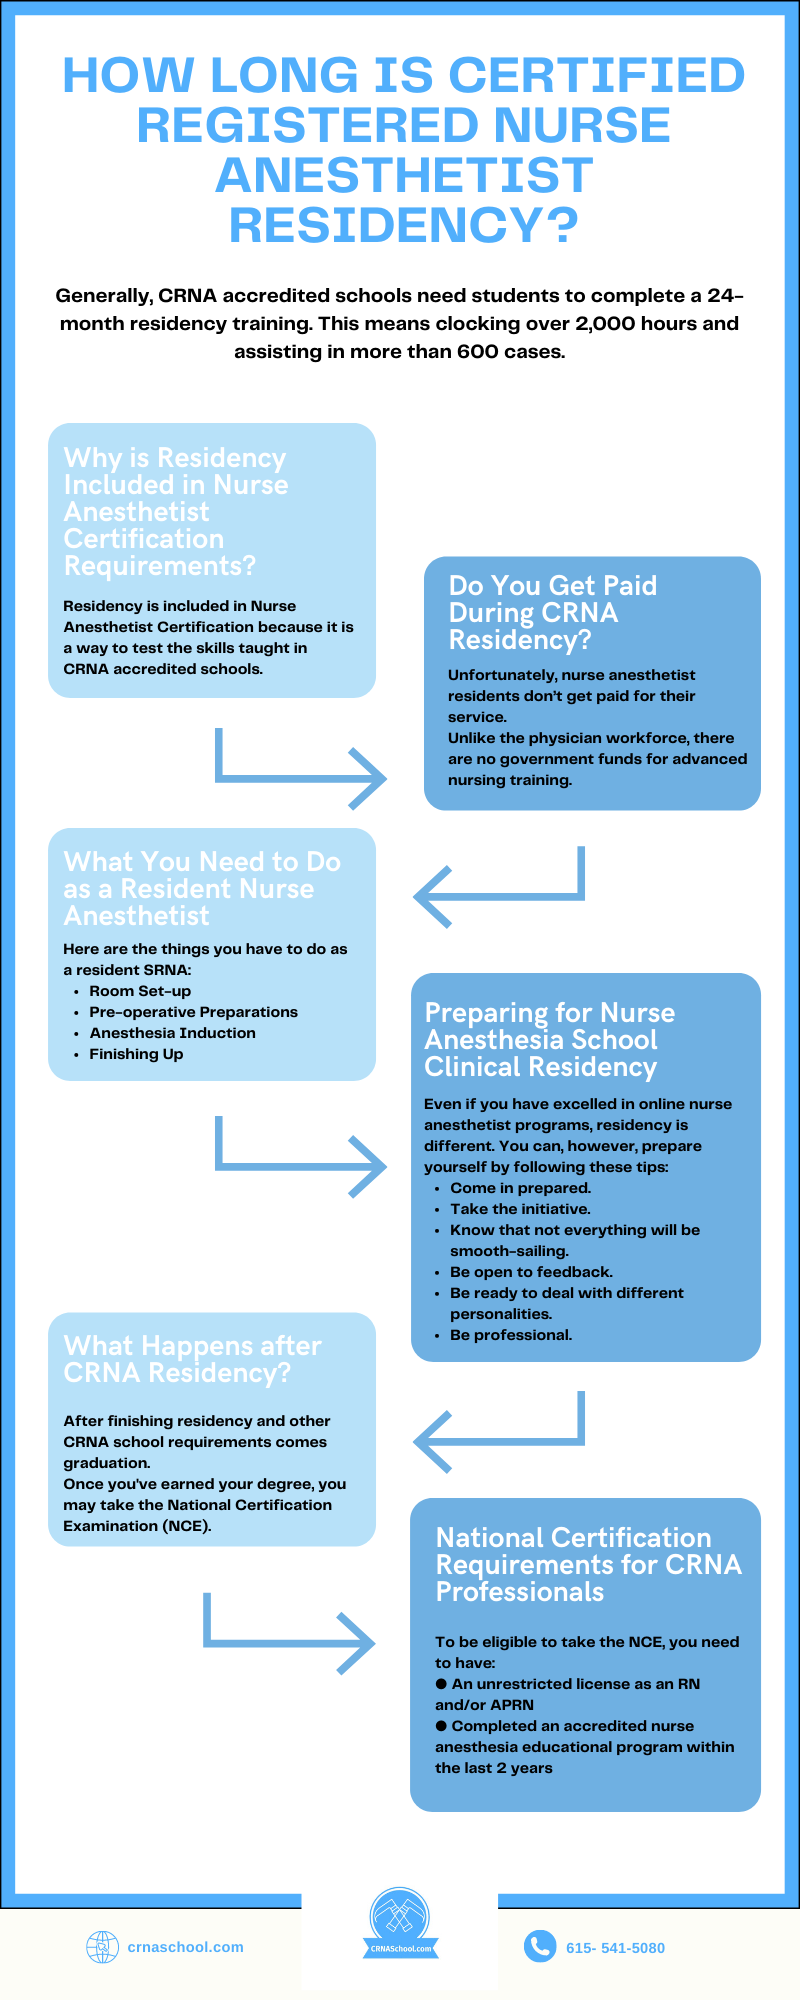 Things to Do as a CRNA resident